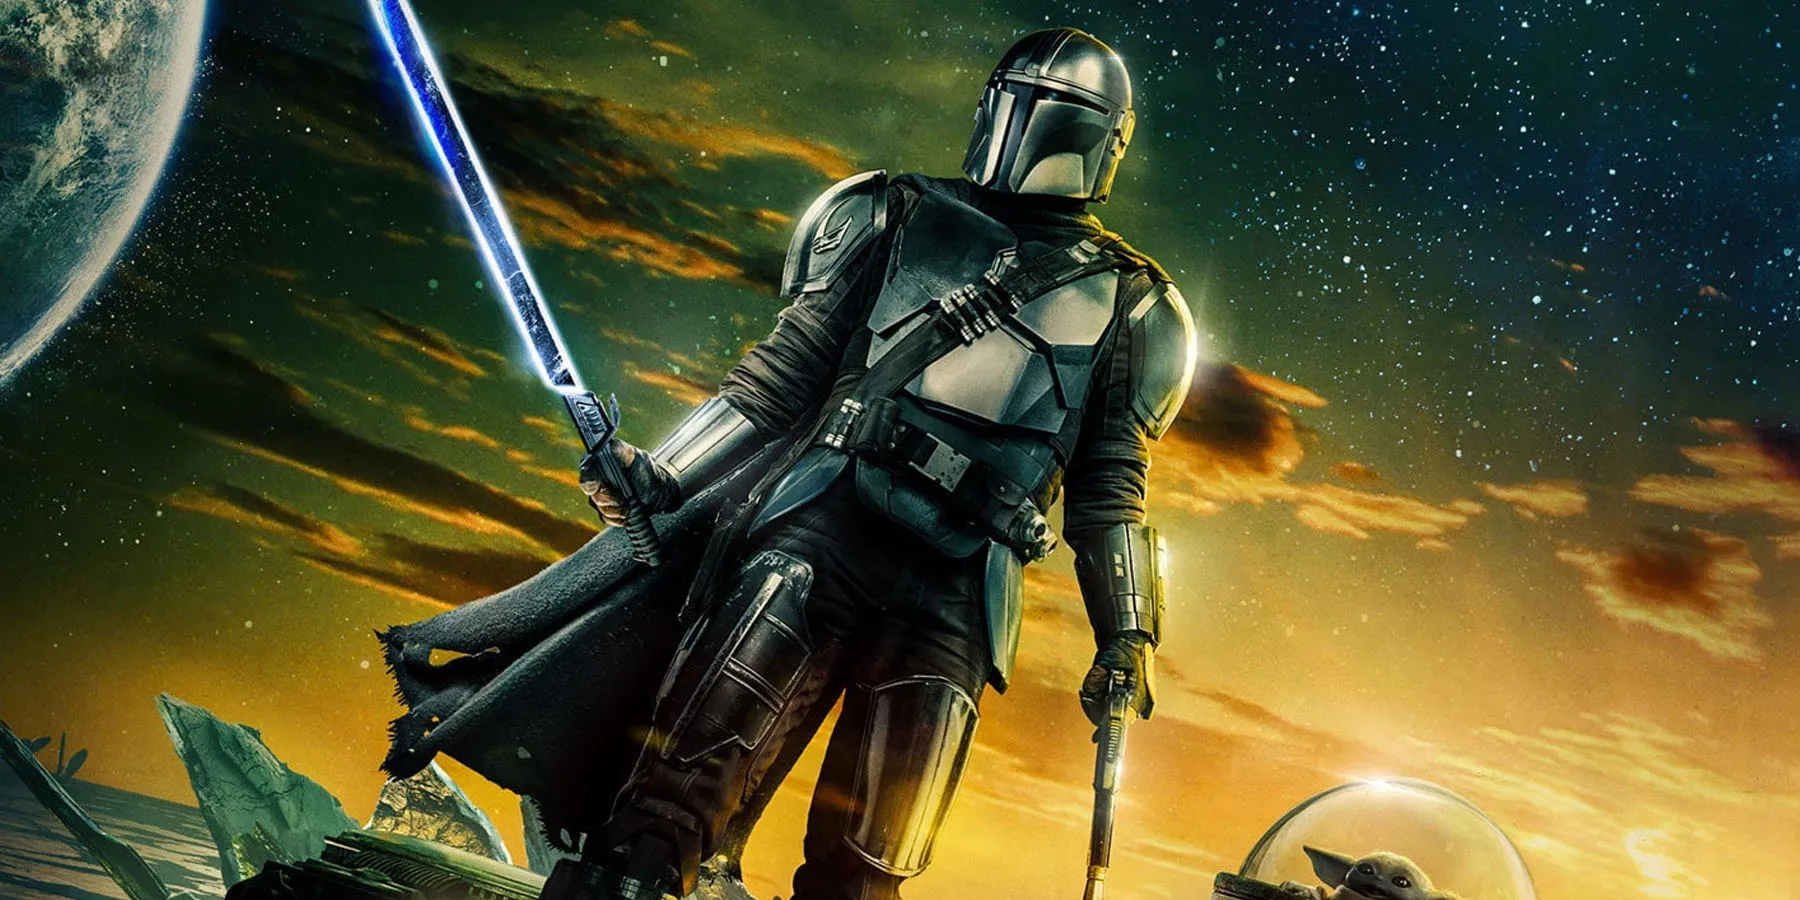 A promotional image for The Mandalorian Season 3, showing Din Djarin wielding the Darksaber amid a night sky.